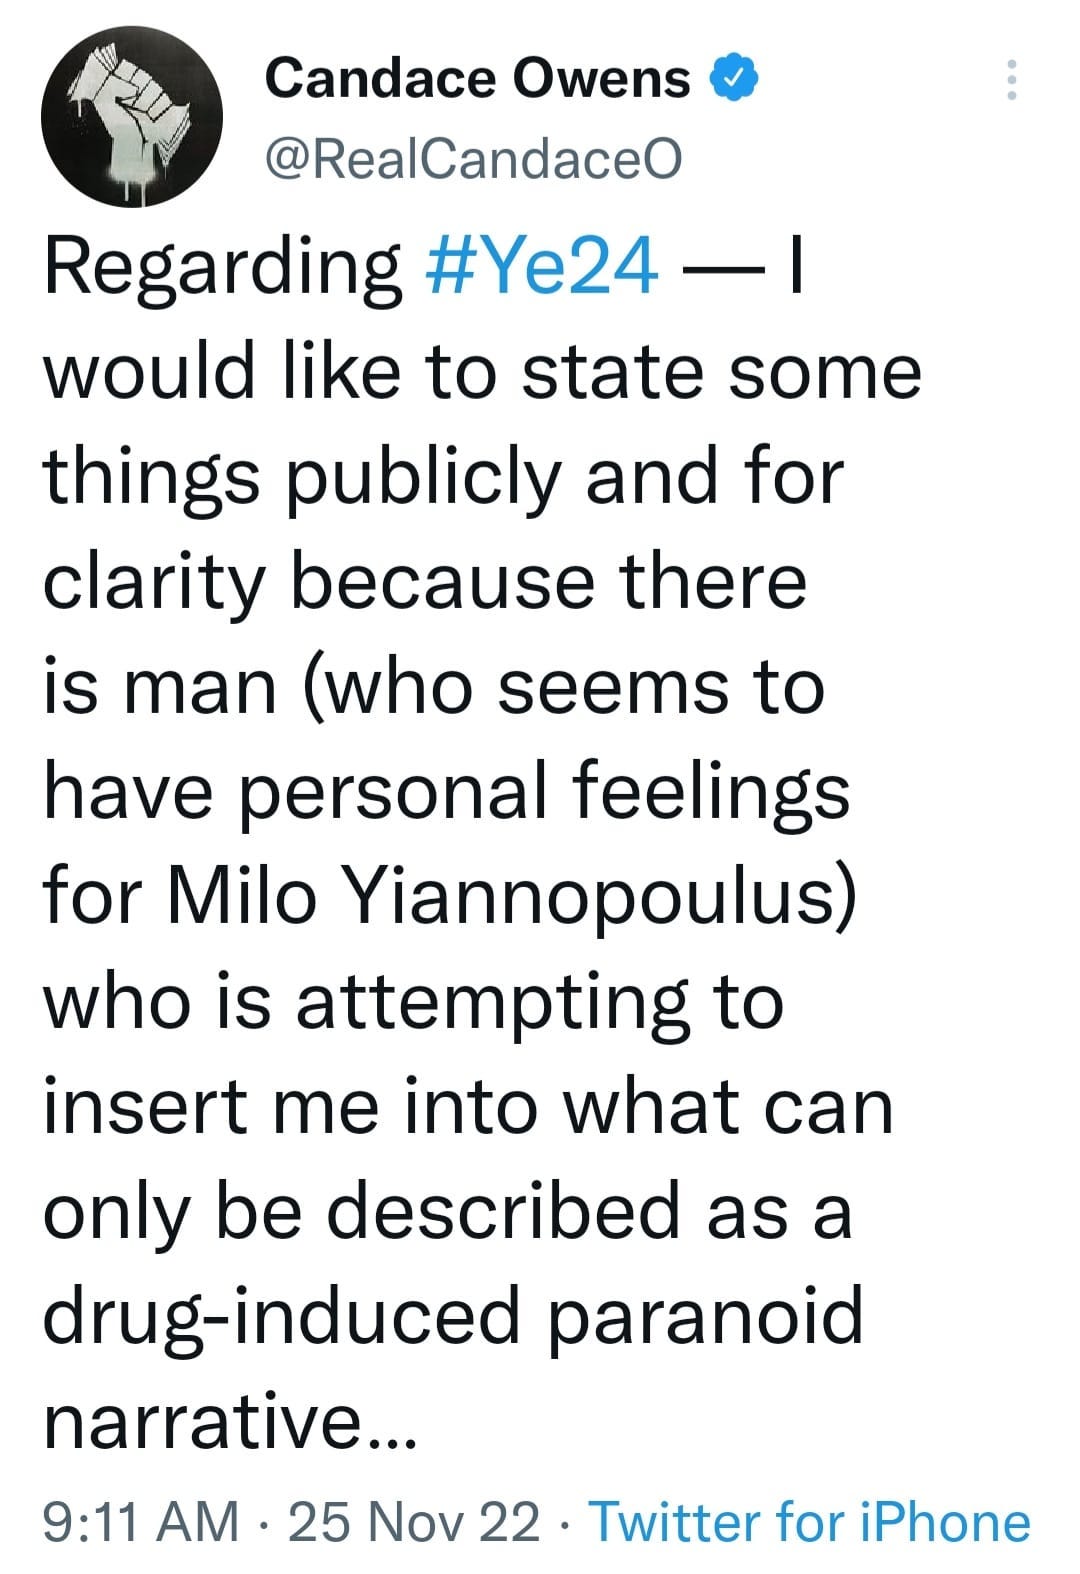 May be an image of text that says 'Candace Owens @RealCandaceO Regarding #Ye24- would like to state some things publicly and for clarity because there is man (who seems to have personal feelings for Milo Yiannopoulus) who is attempting to insert me into what can only be described as a drug-induced paranoid narrative... 25 Nov 22 Twitter for iPhone 9:11 AM'